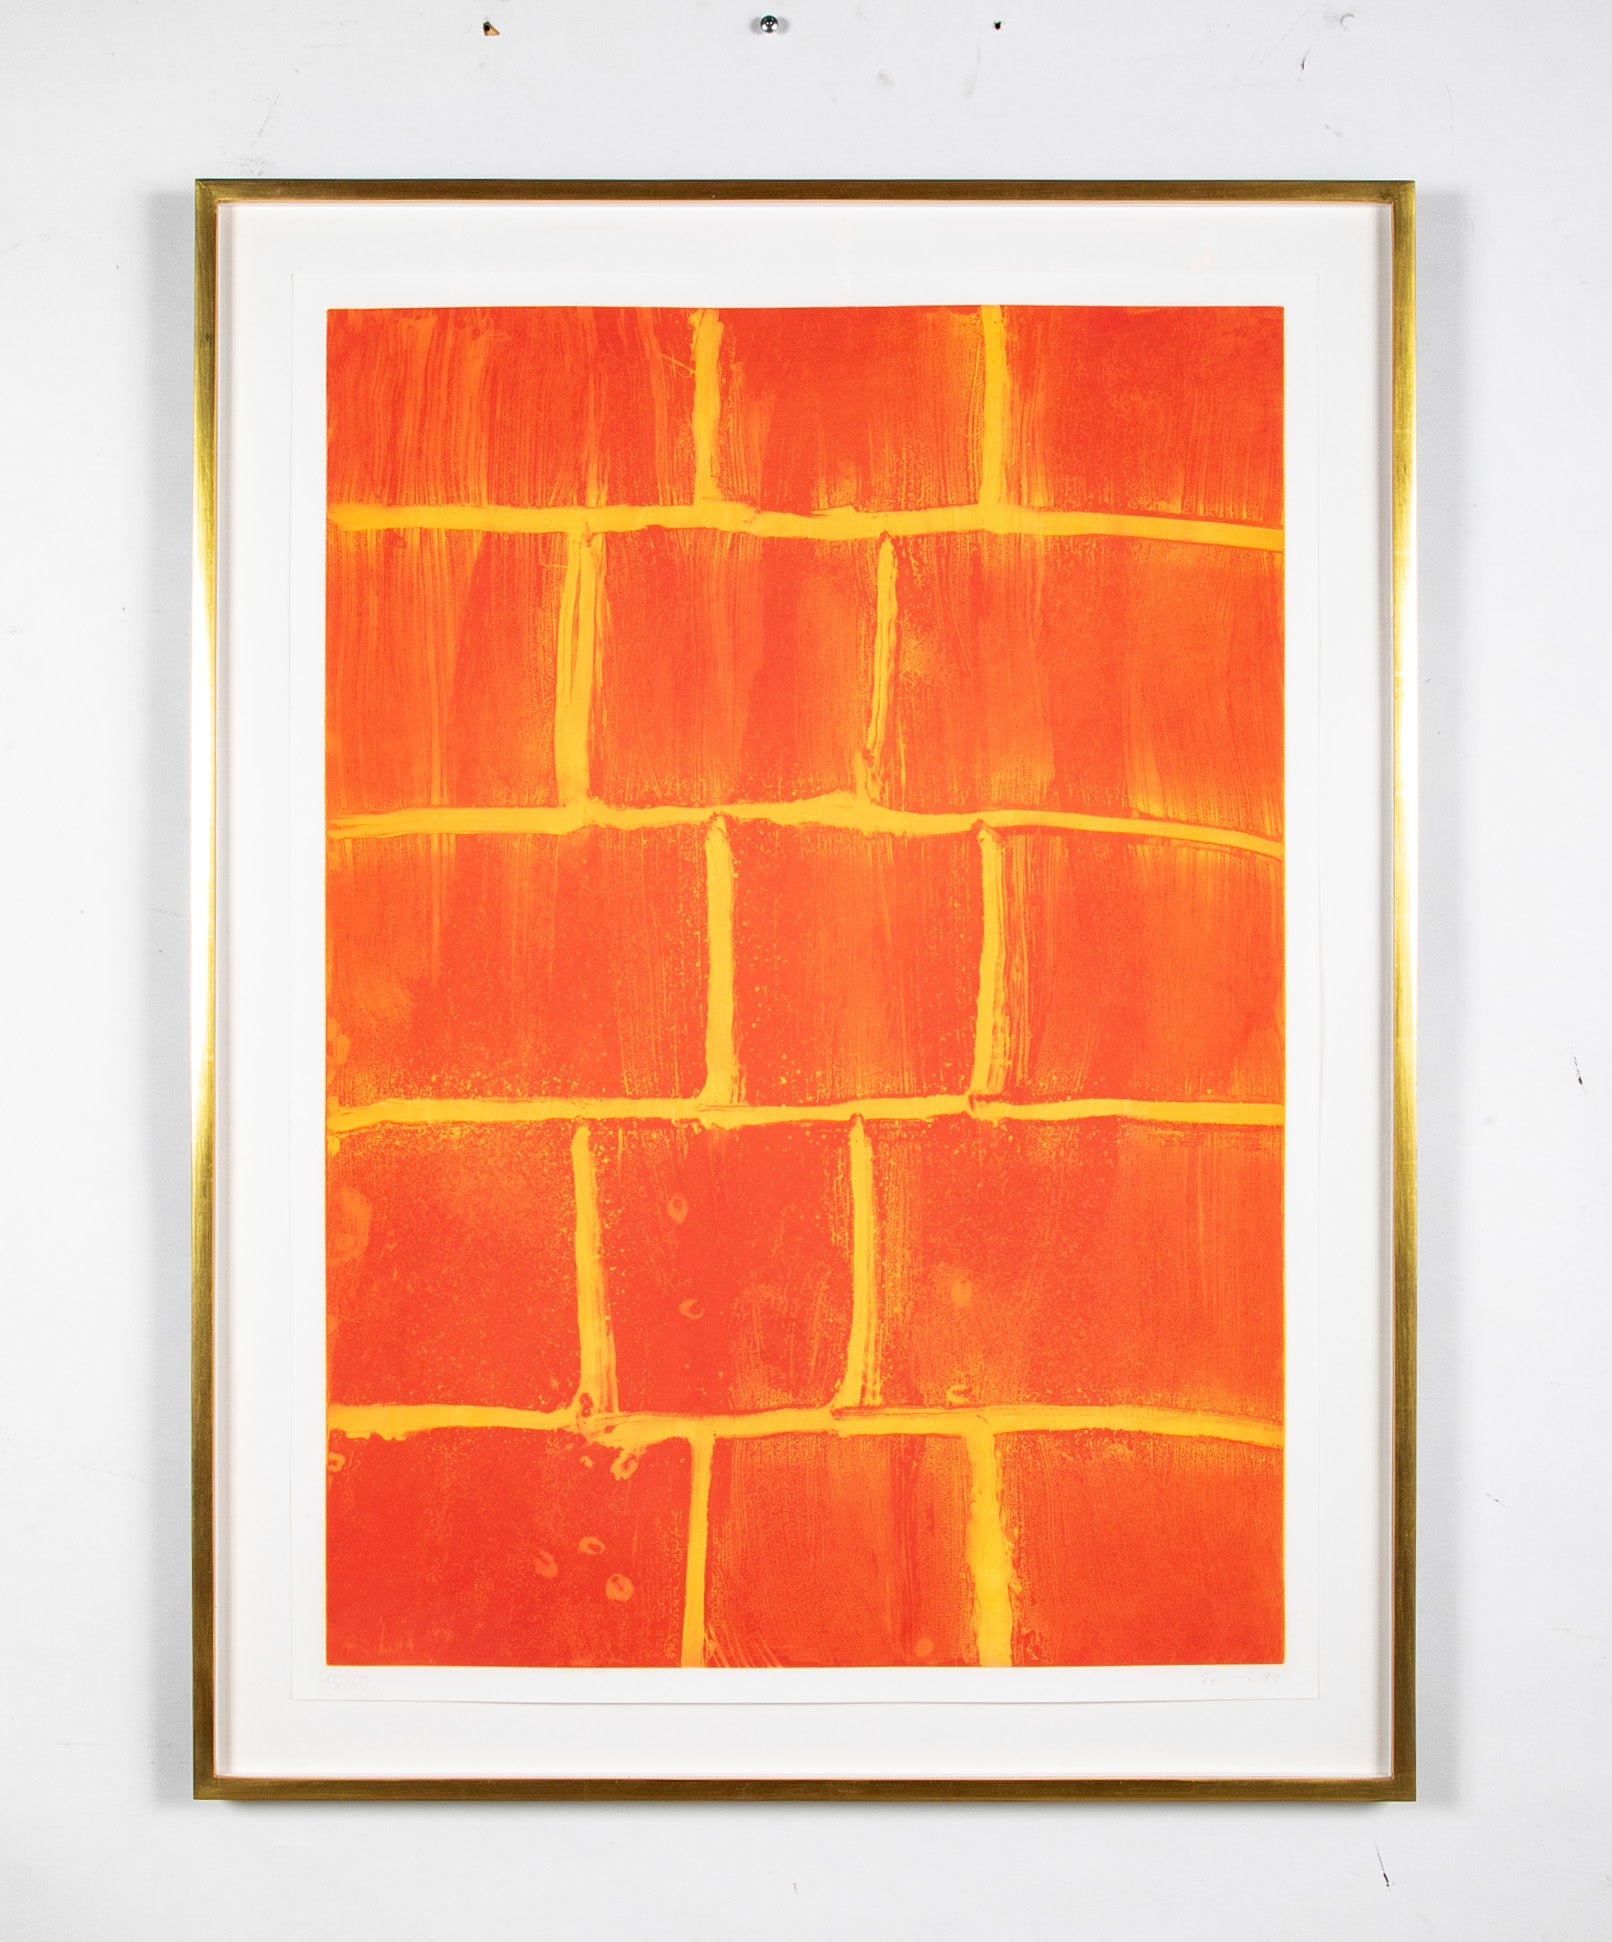 Architektur II "Bricks with Yellow Mortar"  Color Heliogravure by Gunther Forg